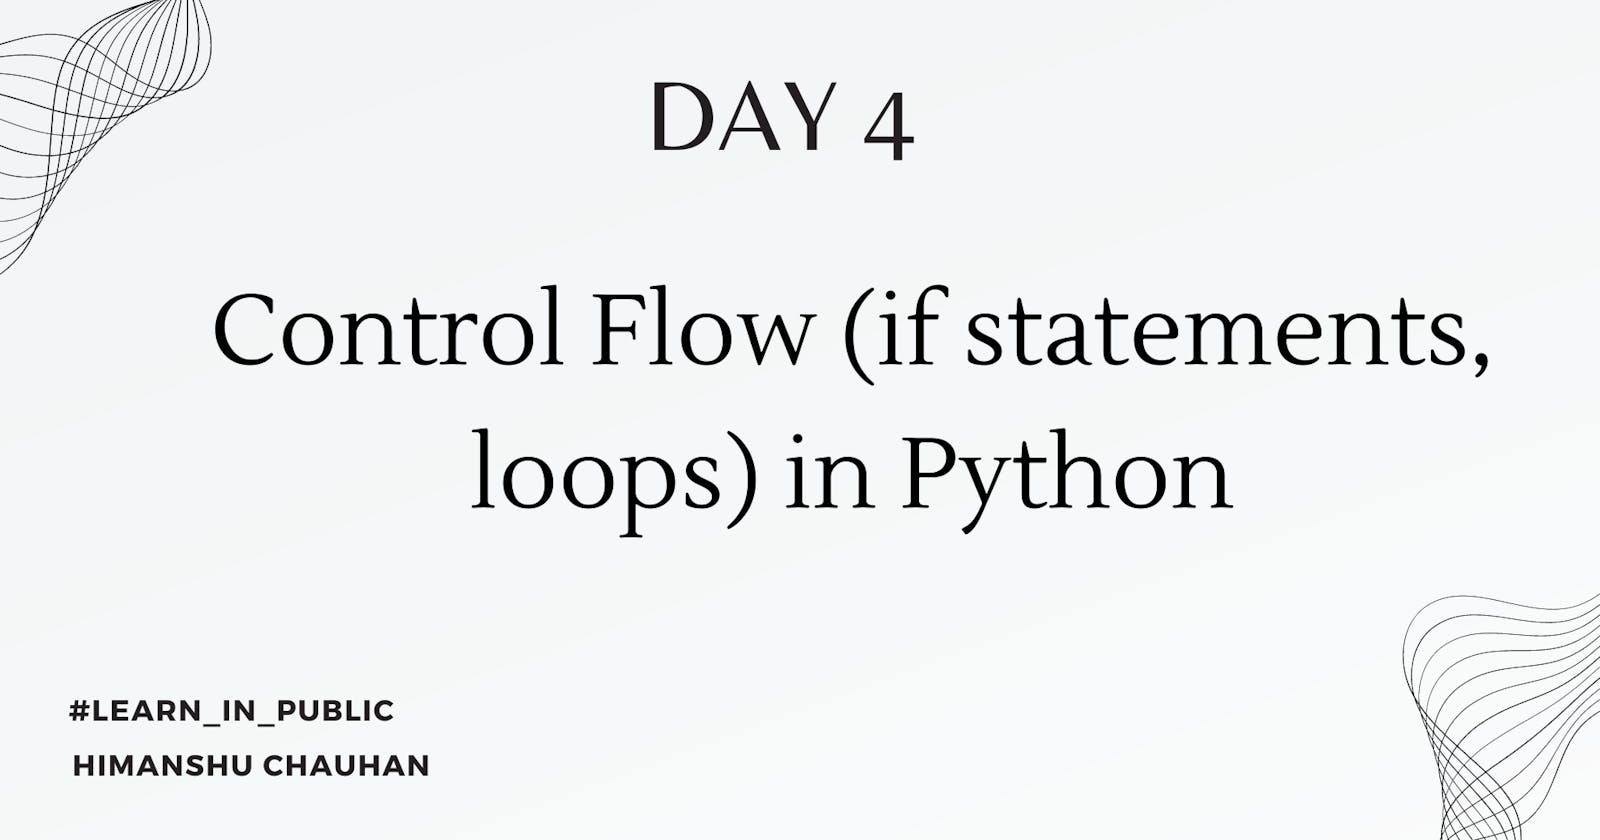 Day 4: Control Flow (if statements, loops) in Python